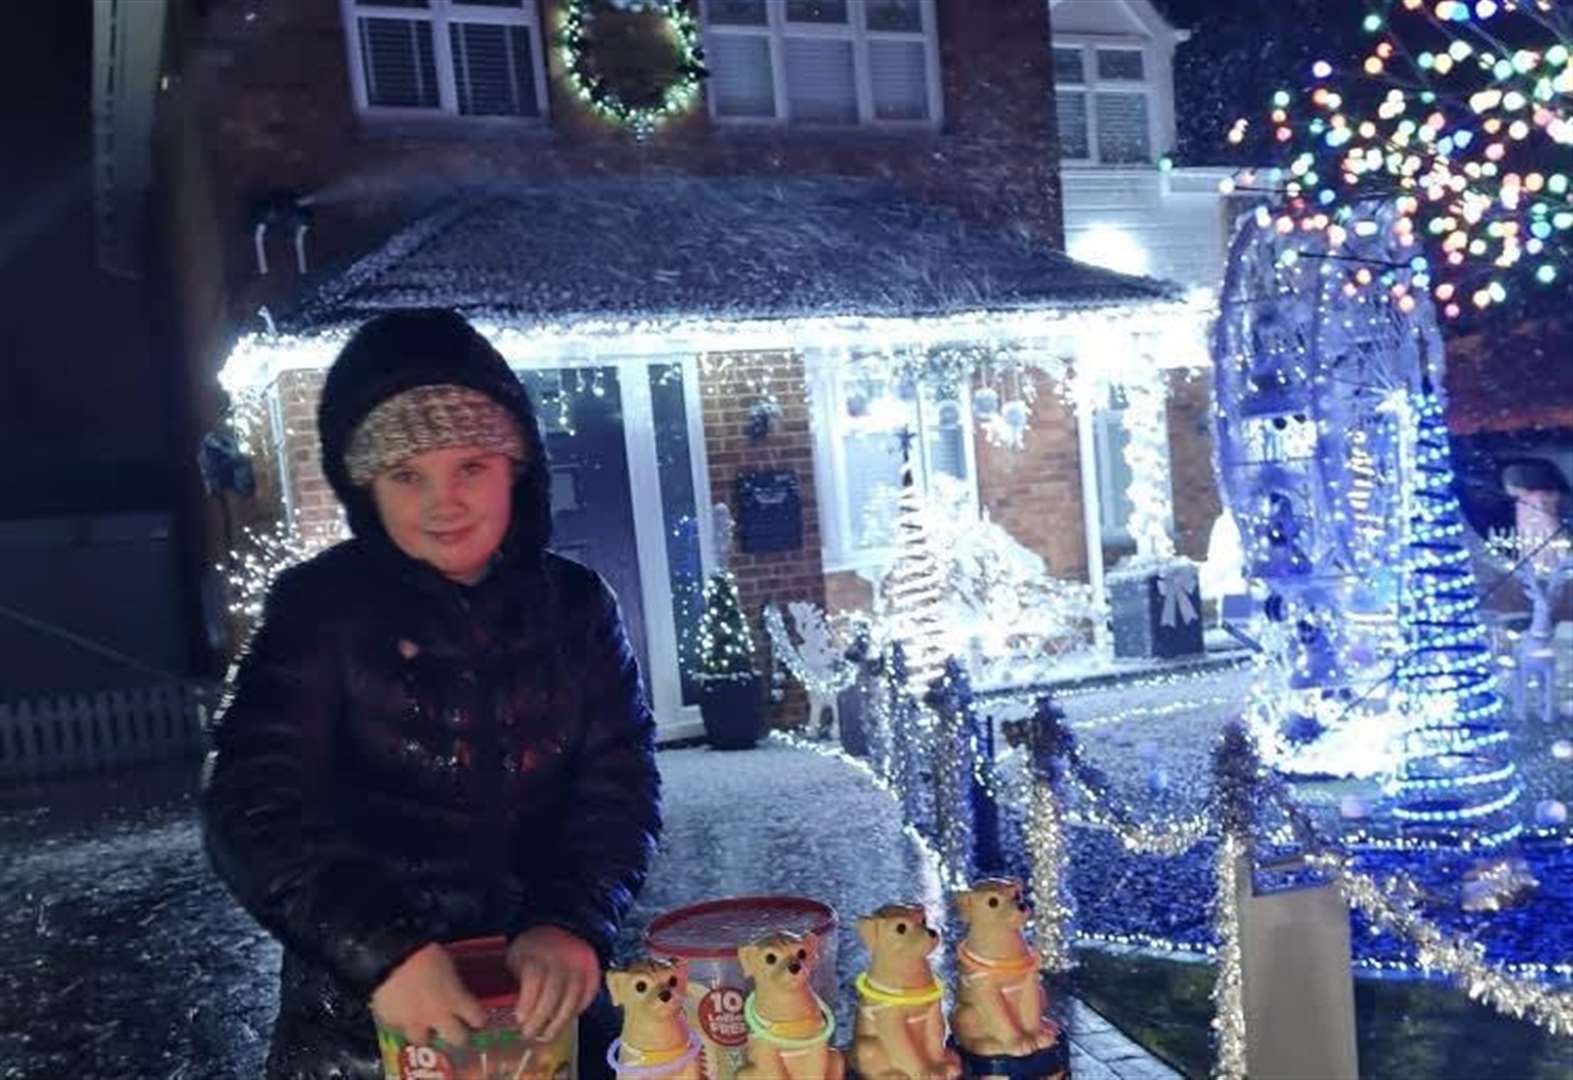 Couple reach new lights with spectacular Christmas display